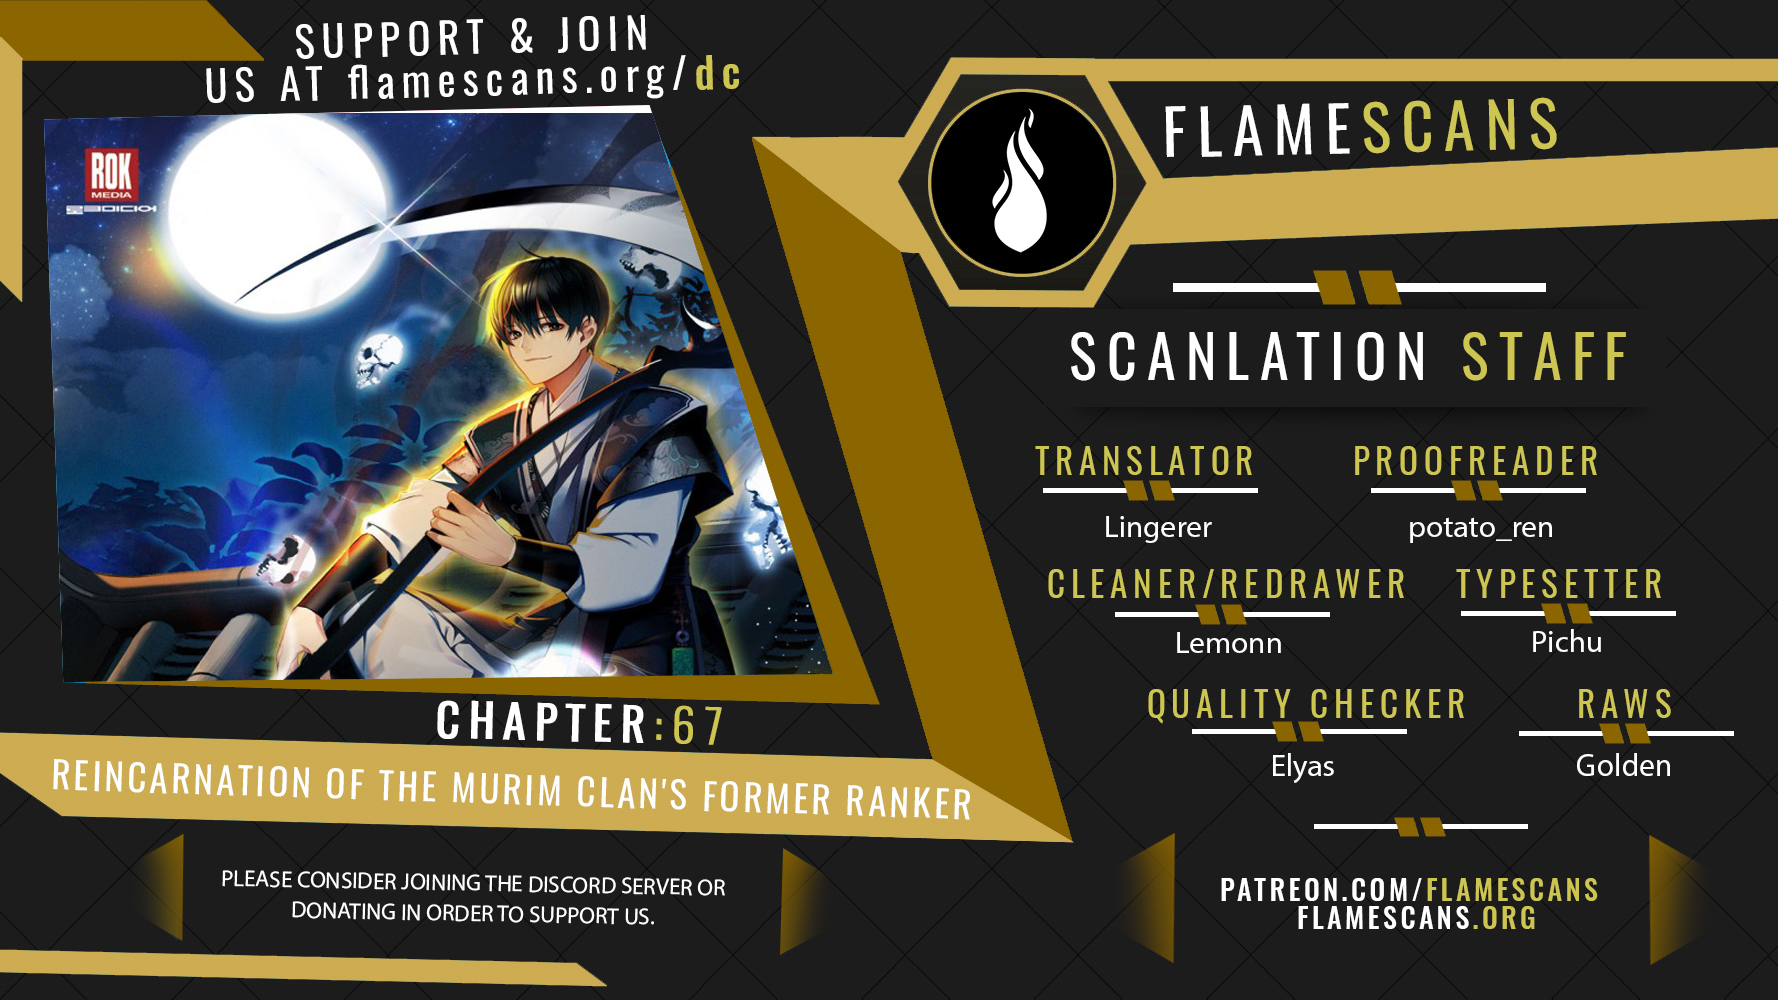 Reincarnation of the Murim Clan's Former Ranker - Chapter 20219 - Image 1